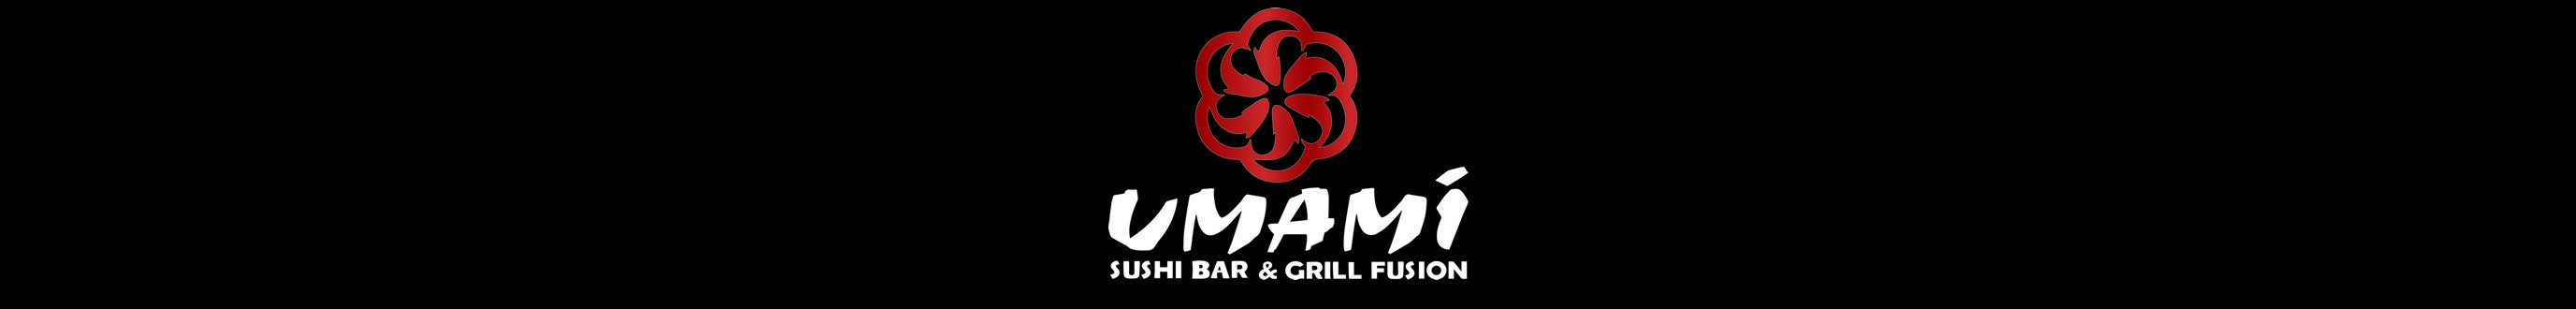 About Umami Sushi Bar & Grill Fusion Restaurant in Conway Arkansas